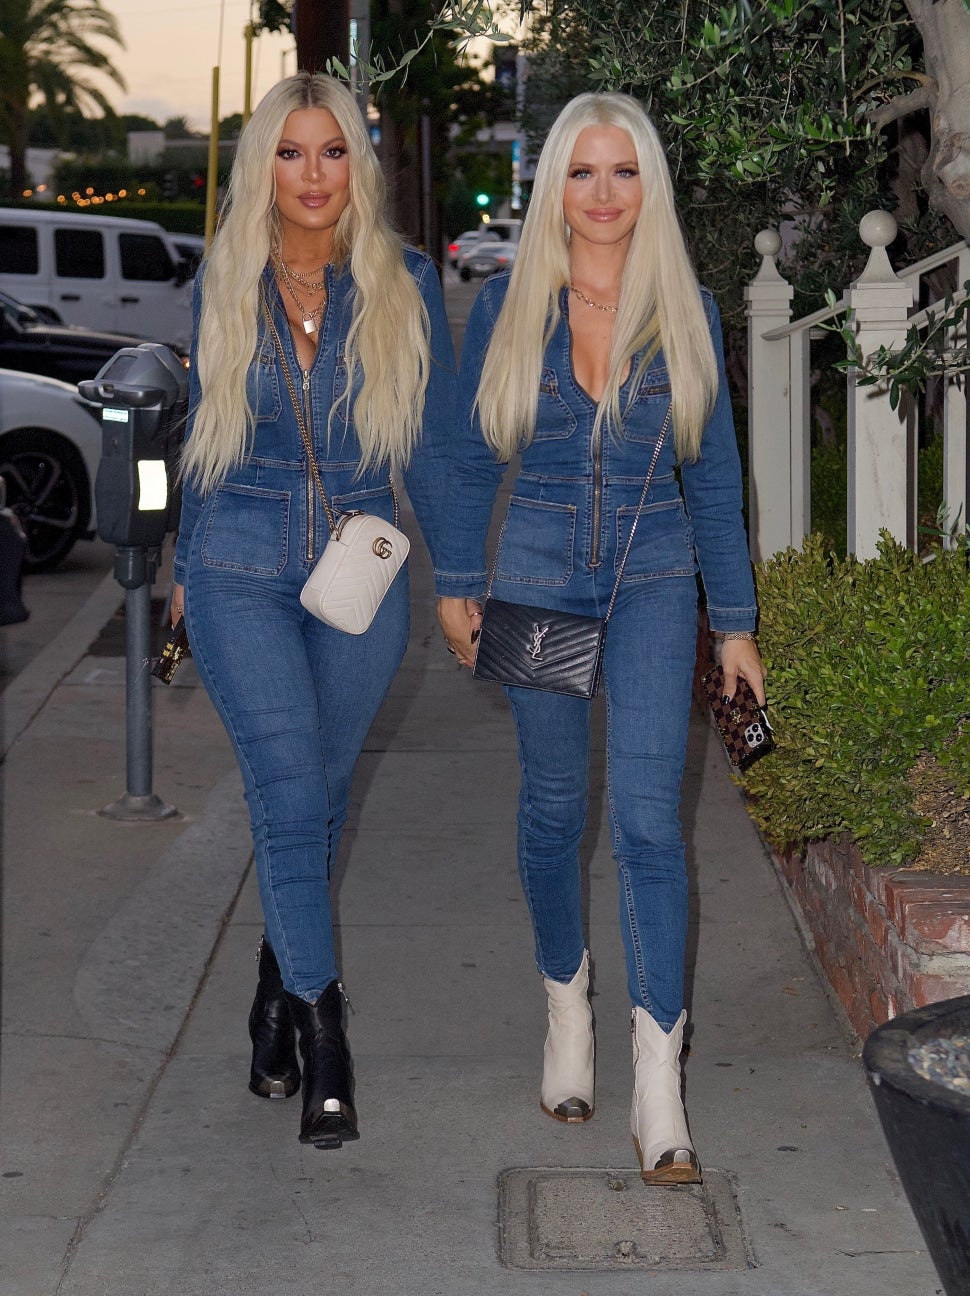 Tori Spelling Matches in Denim Jumpsuit with her Hairstylist Laura Rugetti at Catch LA, Los Angeles, California, USA - 02 Sep 2021